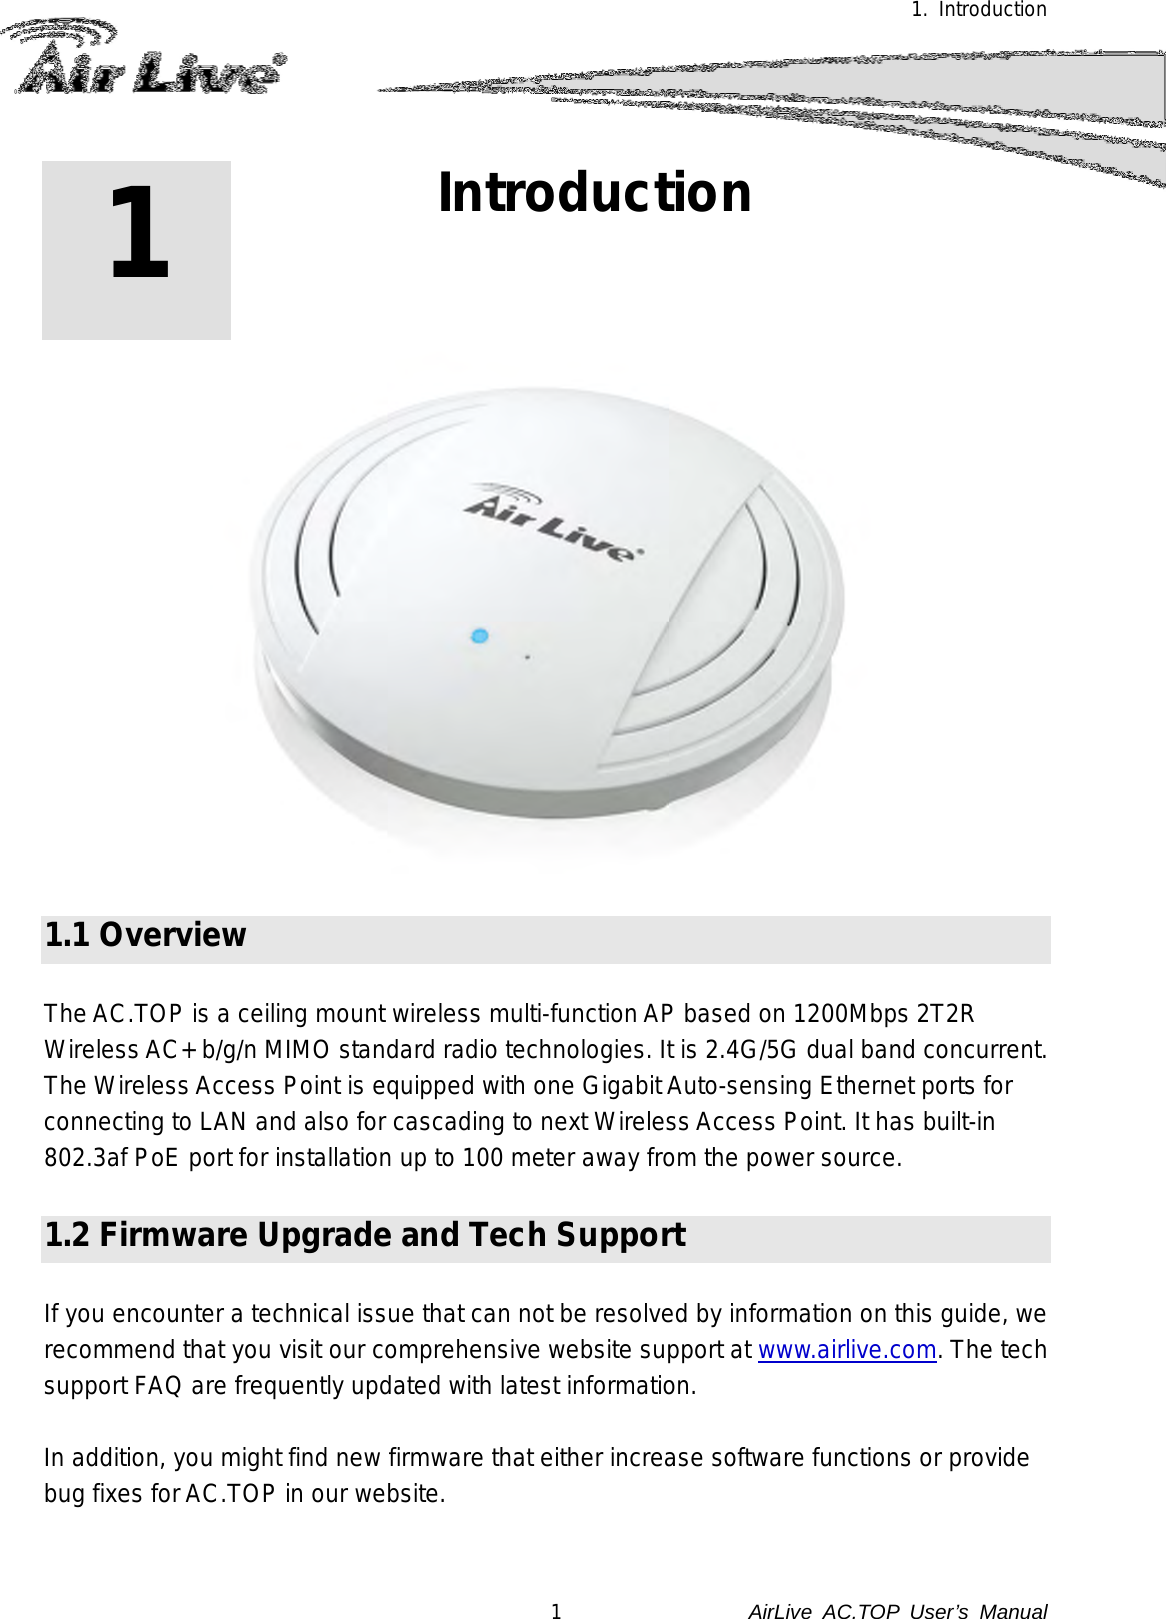 1. Introduction 1 1. Introduction   1.1 Overview  The AC.TOP is a ceiling mount wireless multi-function AP based on 1200Mbps 2T2R Wireless AC+ b/g/n MIMO standard radio technologies. It is 2.4G/5G dual band concurrent. The Wireless Access Point is equipped with one Gigabit Auto-sensing Ethernet ports for connecting to LAN and also for cascading to next Wireless Access Point. It has built-in 802.3af PoE port for installation up to 100 meter away from the power source.  1.2 Firmware Upgrade and Tech Support  If you encounter a technical issue that can not be resolved by information on this guide, we recommend that you visit our comprehensive website support at www.airlive.com. The tech support FAQ are frequently updated with latest information.  In addition, you might find new firmware that either increase software functions or provide bug fixes for AC.TOP in our website.    1               AirLive  AC.TOP User’s Manual 